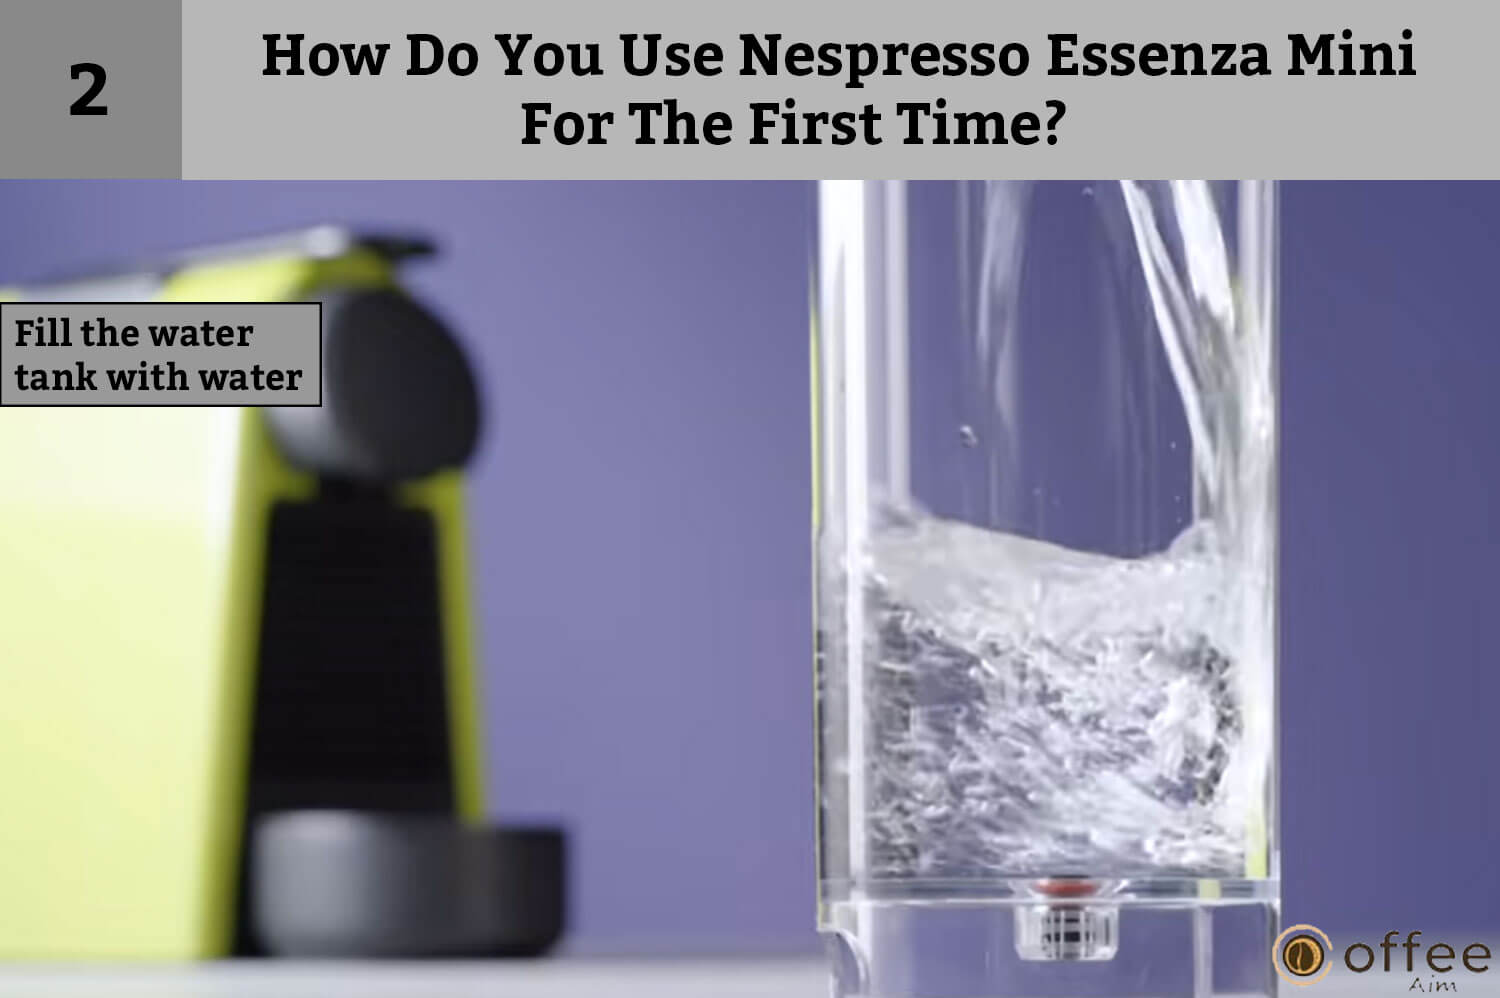 Second instruction of How Do You Use Nespresso Essenza Mini For The First Time? is Fill the water tank with water.